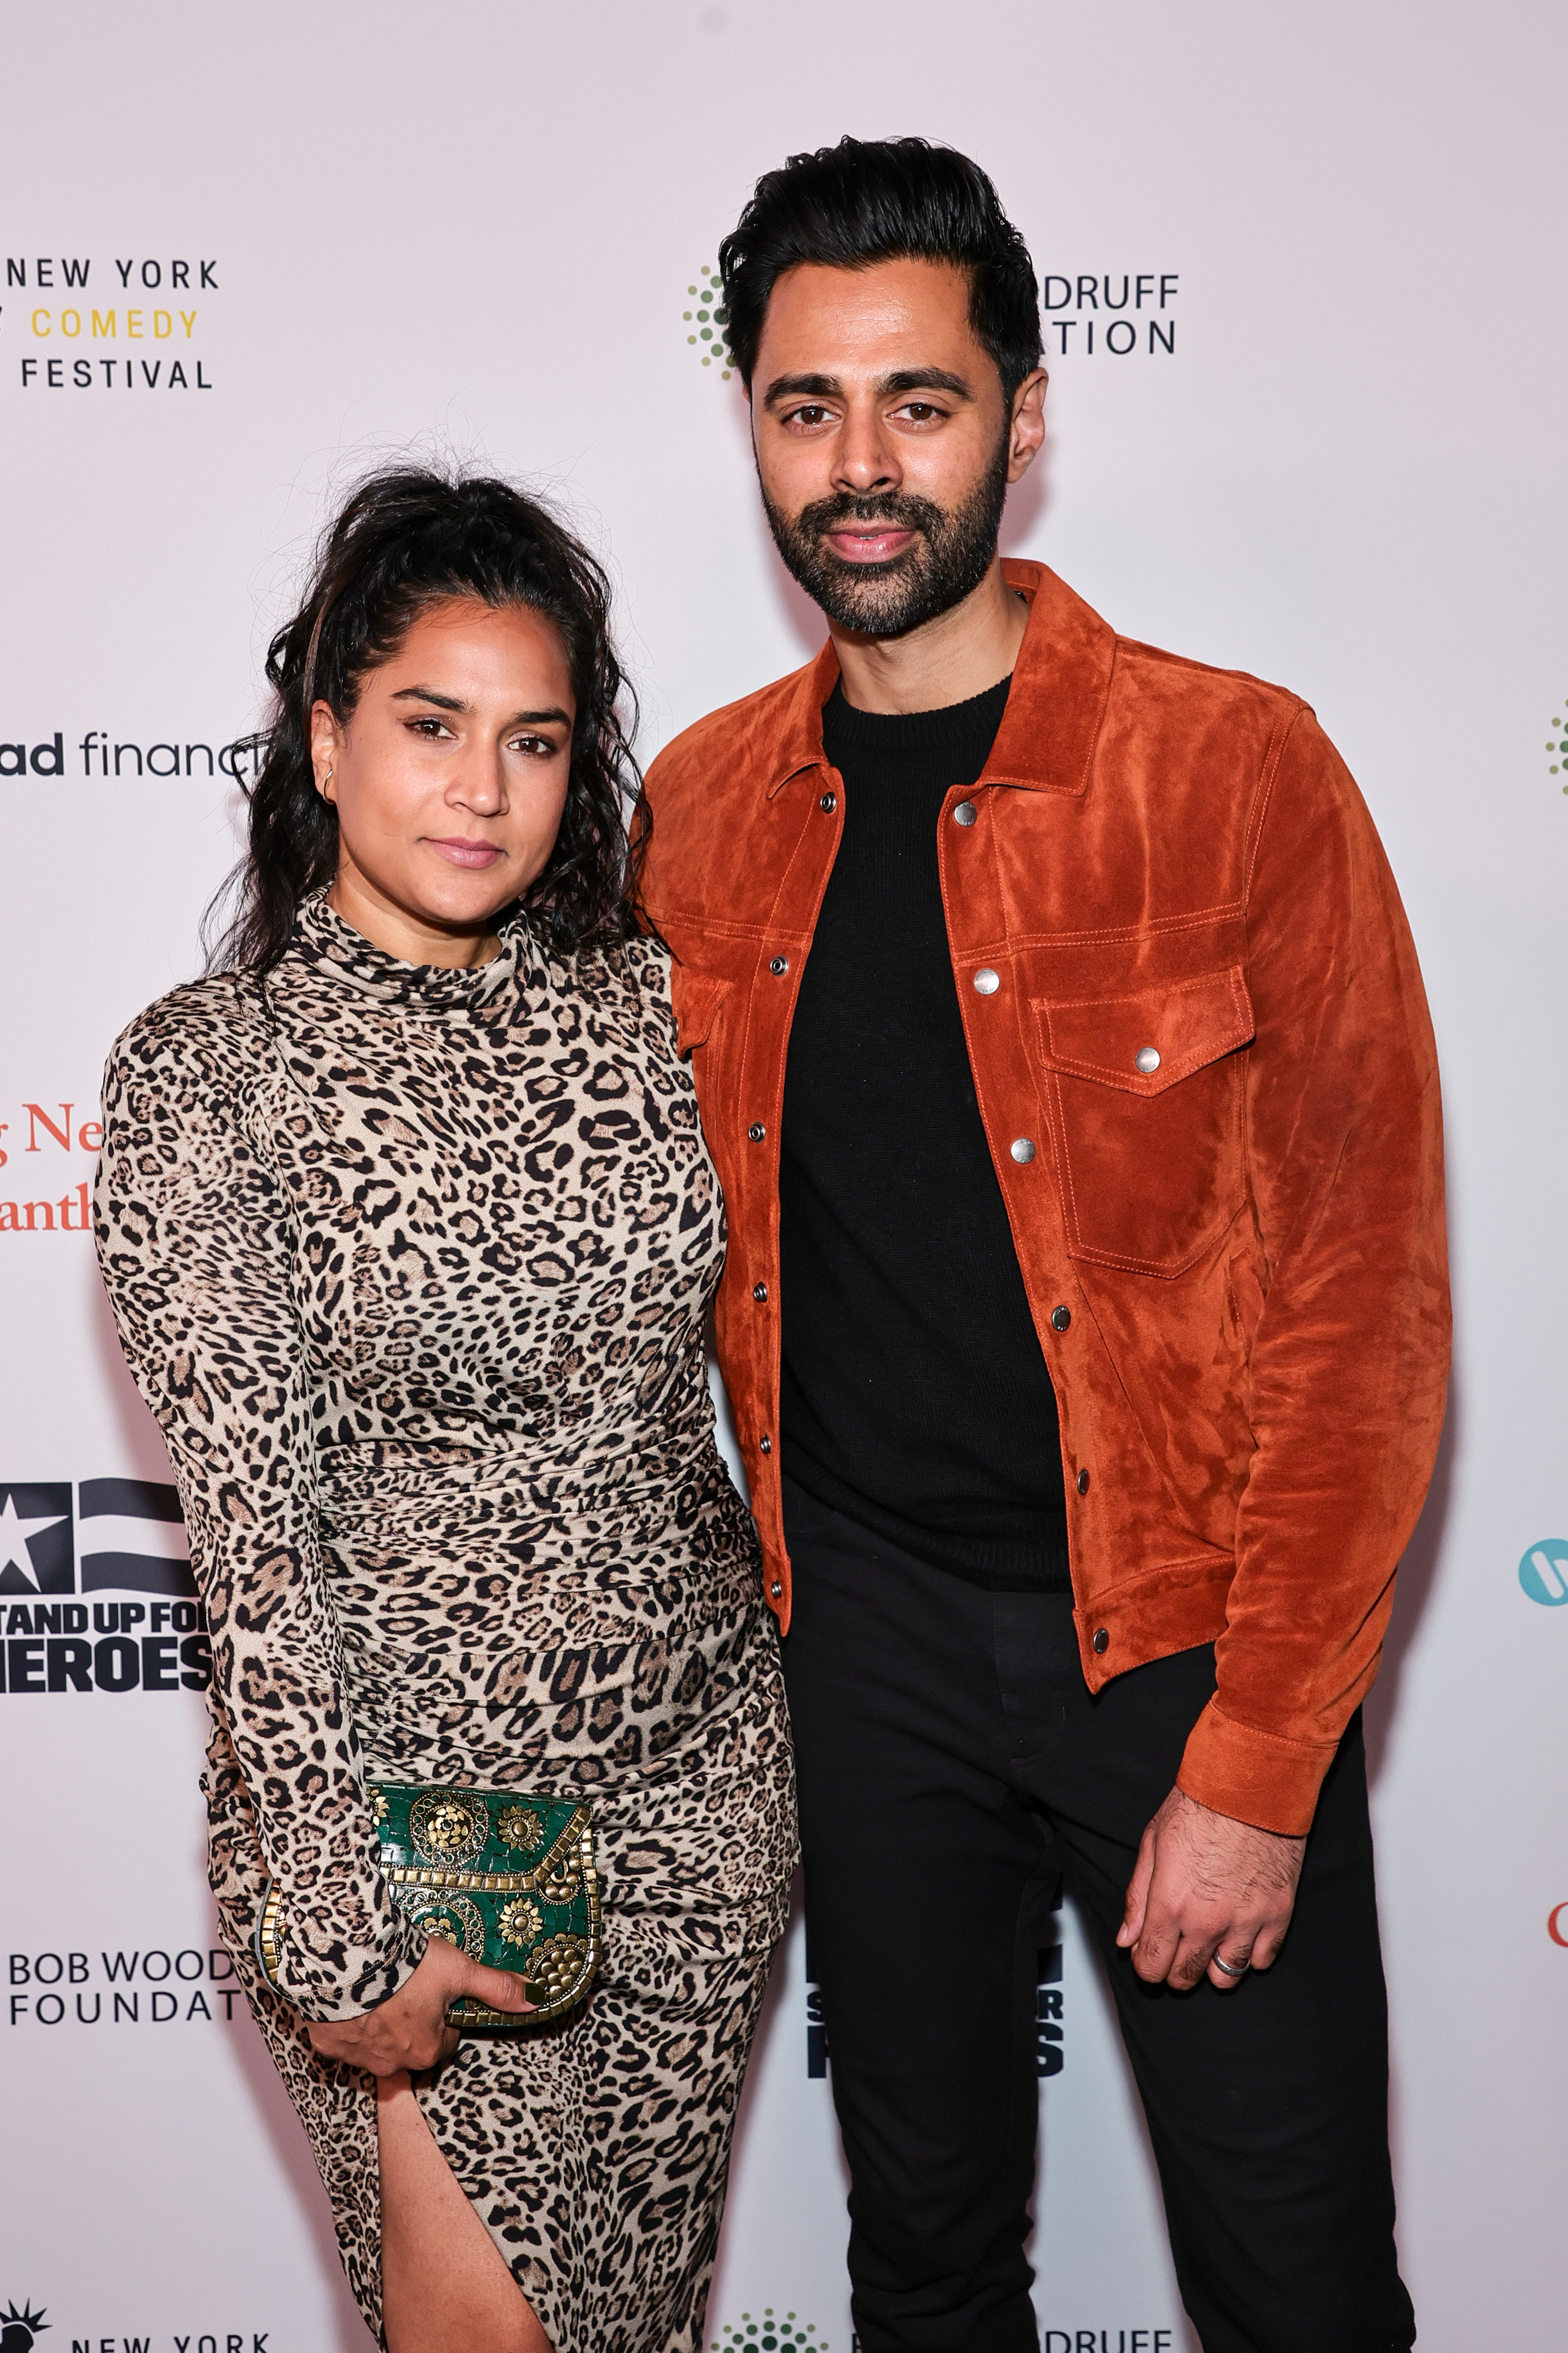 Beena Patel and Hasan Minhaj attend the 16th Annual Stand Up For Heroes Benefit presented by Bob Woodruff Foundation and NY Comedy Festival at David Geffen Hall on November 07, 2022 in New York City | Source: Getty Images